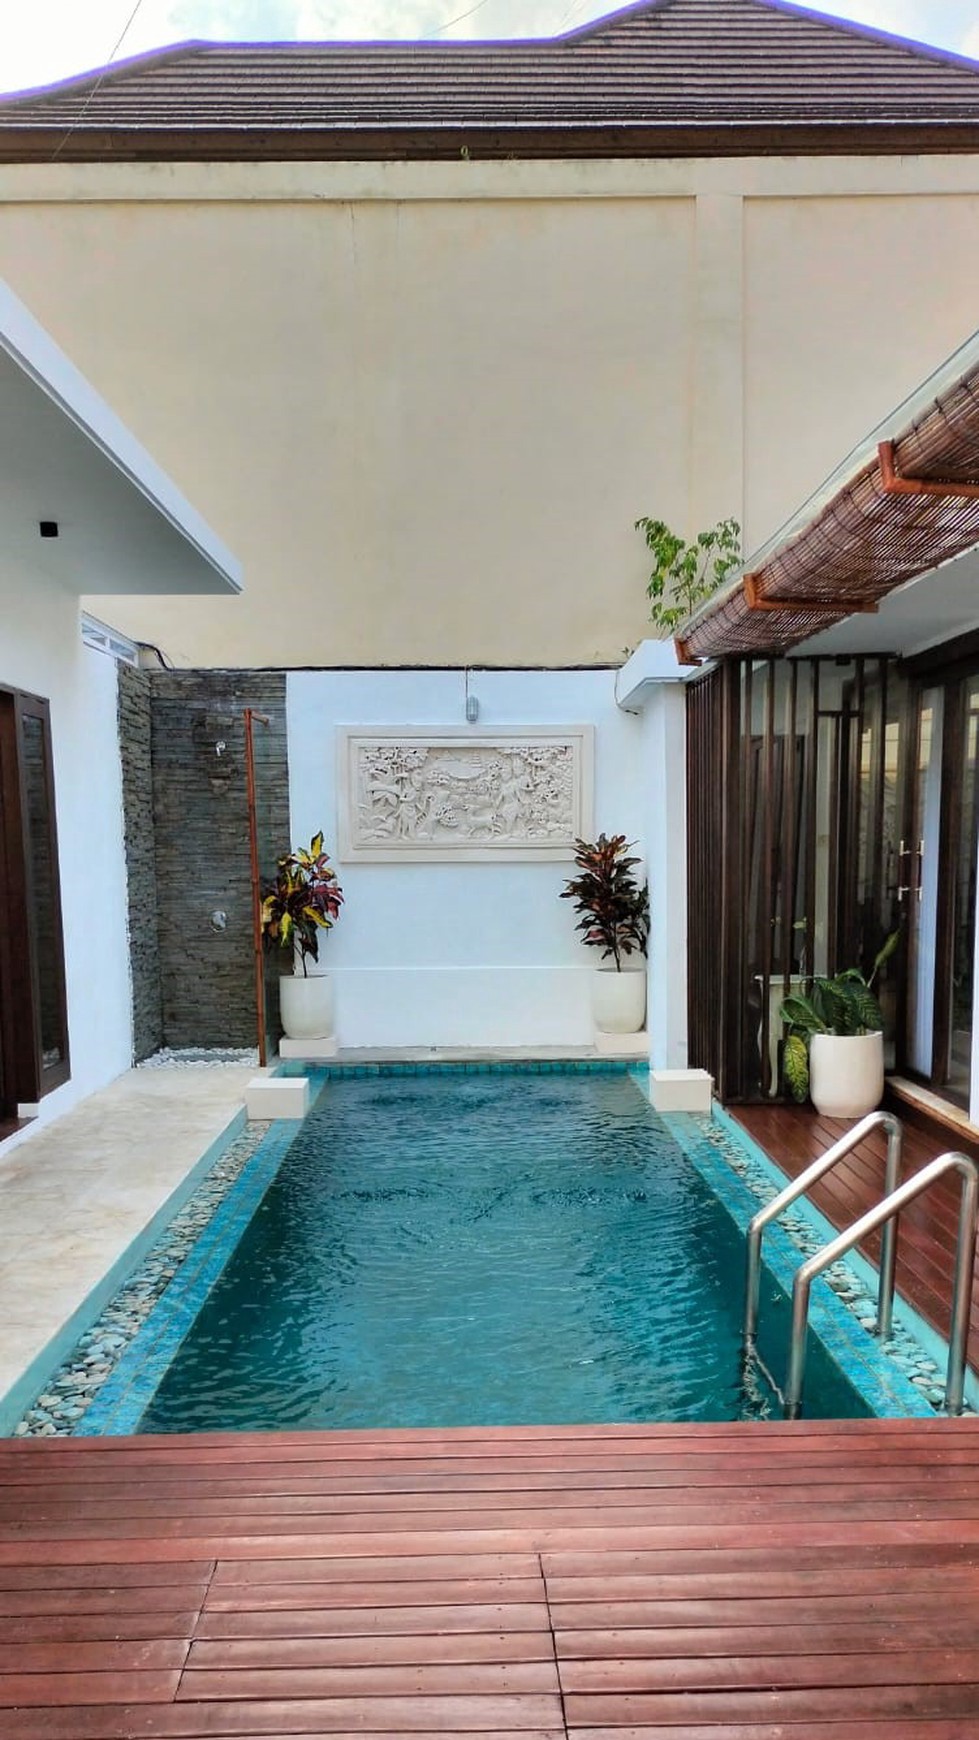 For Rent Yearly - Modern villa fully furnished area Tumbak Bayuh